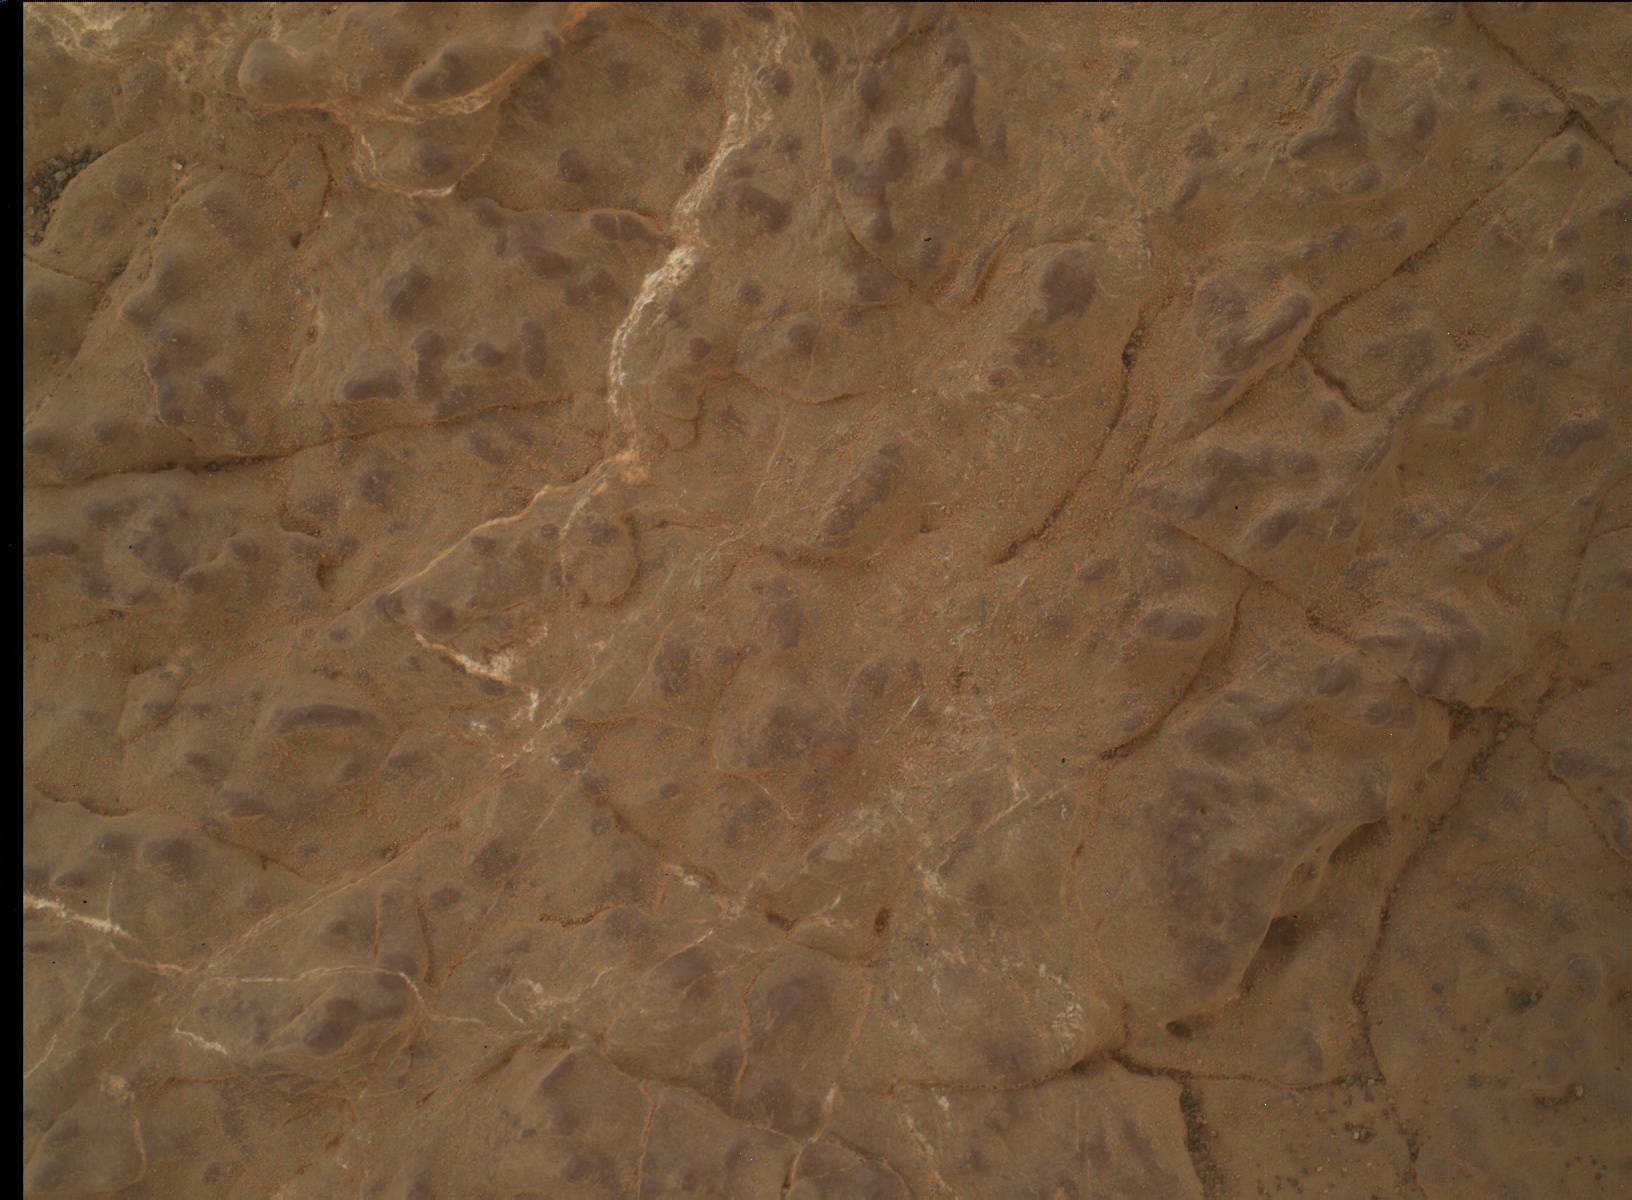 Nasa's Mars rover Curiosity acquired this image using its Mars Hand Lens Imager (MAHLI) on Sol 3031